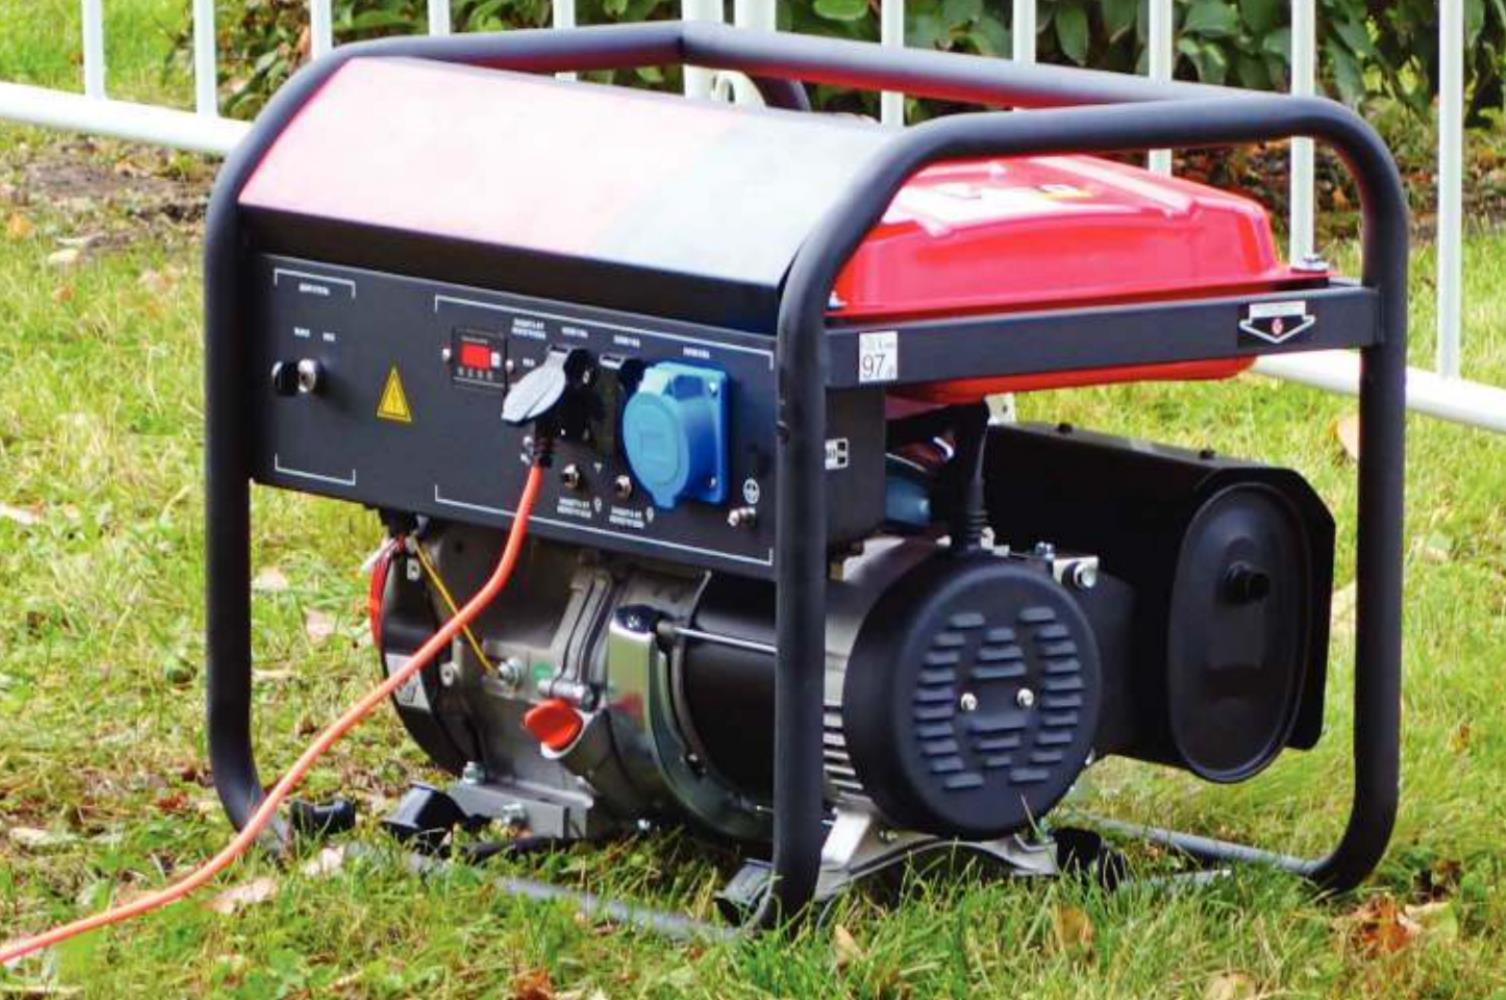 It is important to test generators annually to make sure they work correctly. Provided